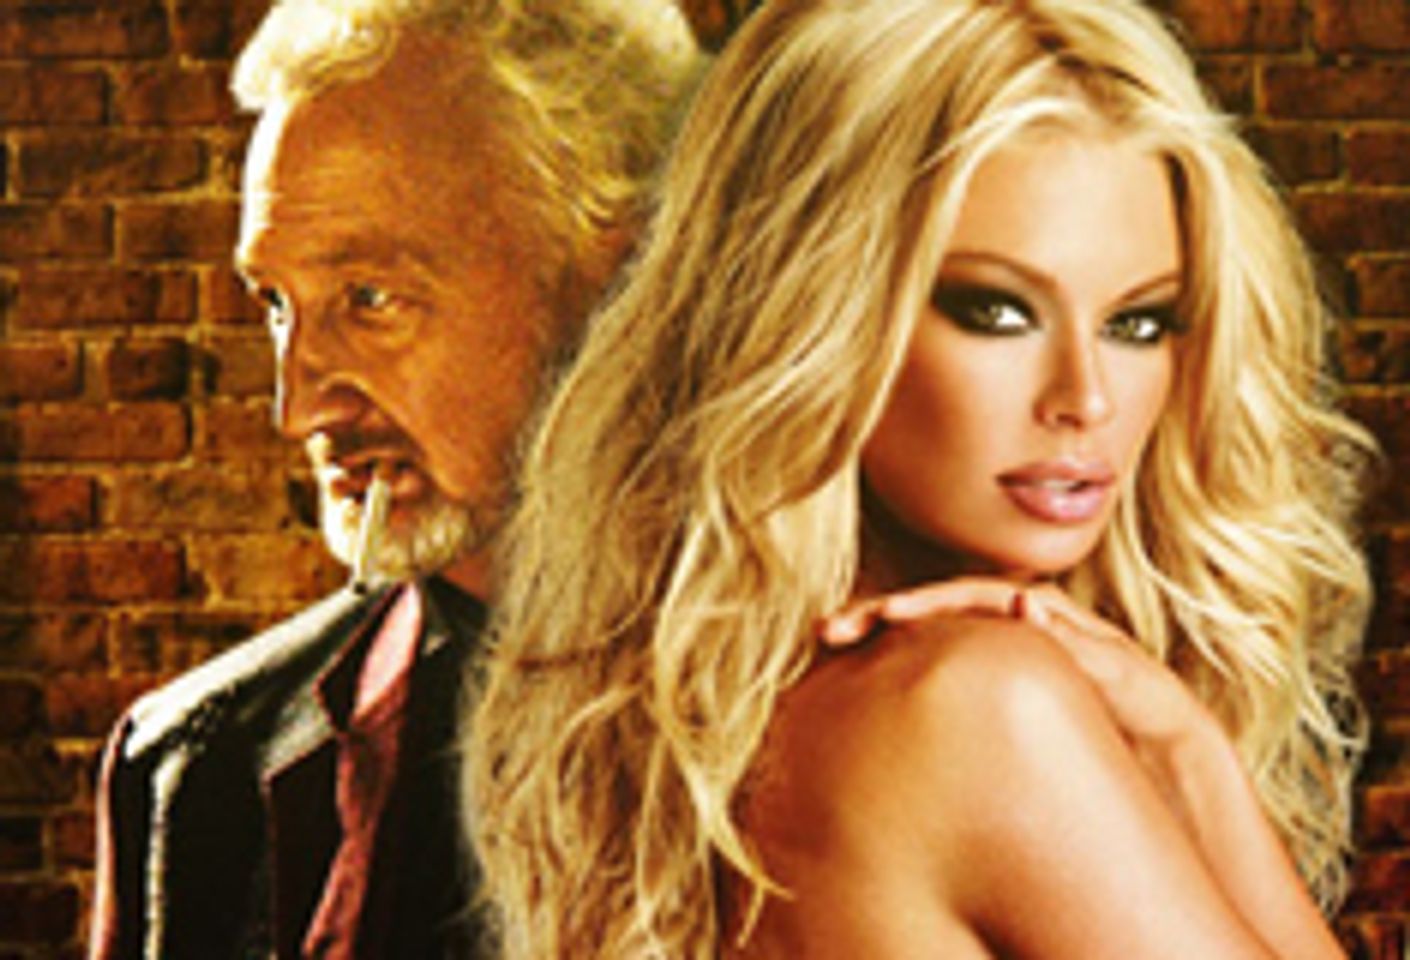 Blood, Guts and Tits: Jenna Jameson Stars in <i>Zombie Strippers</i>